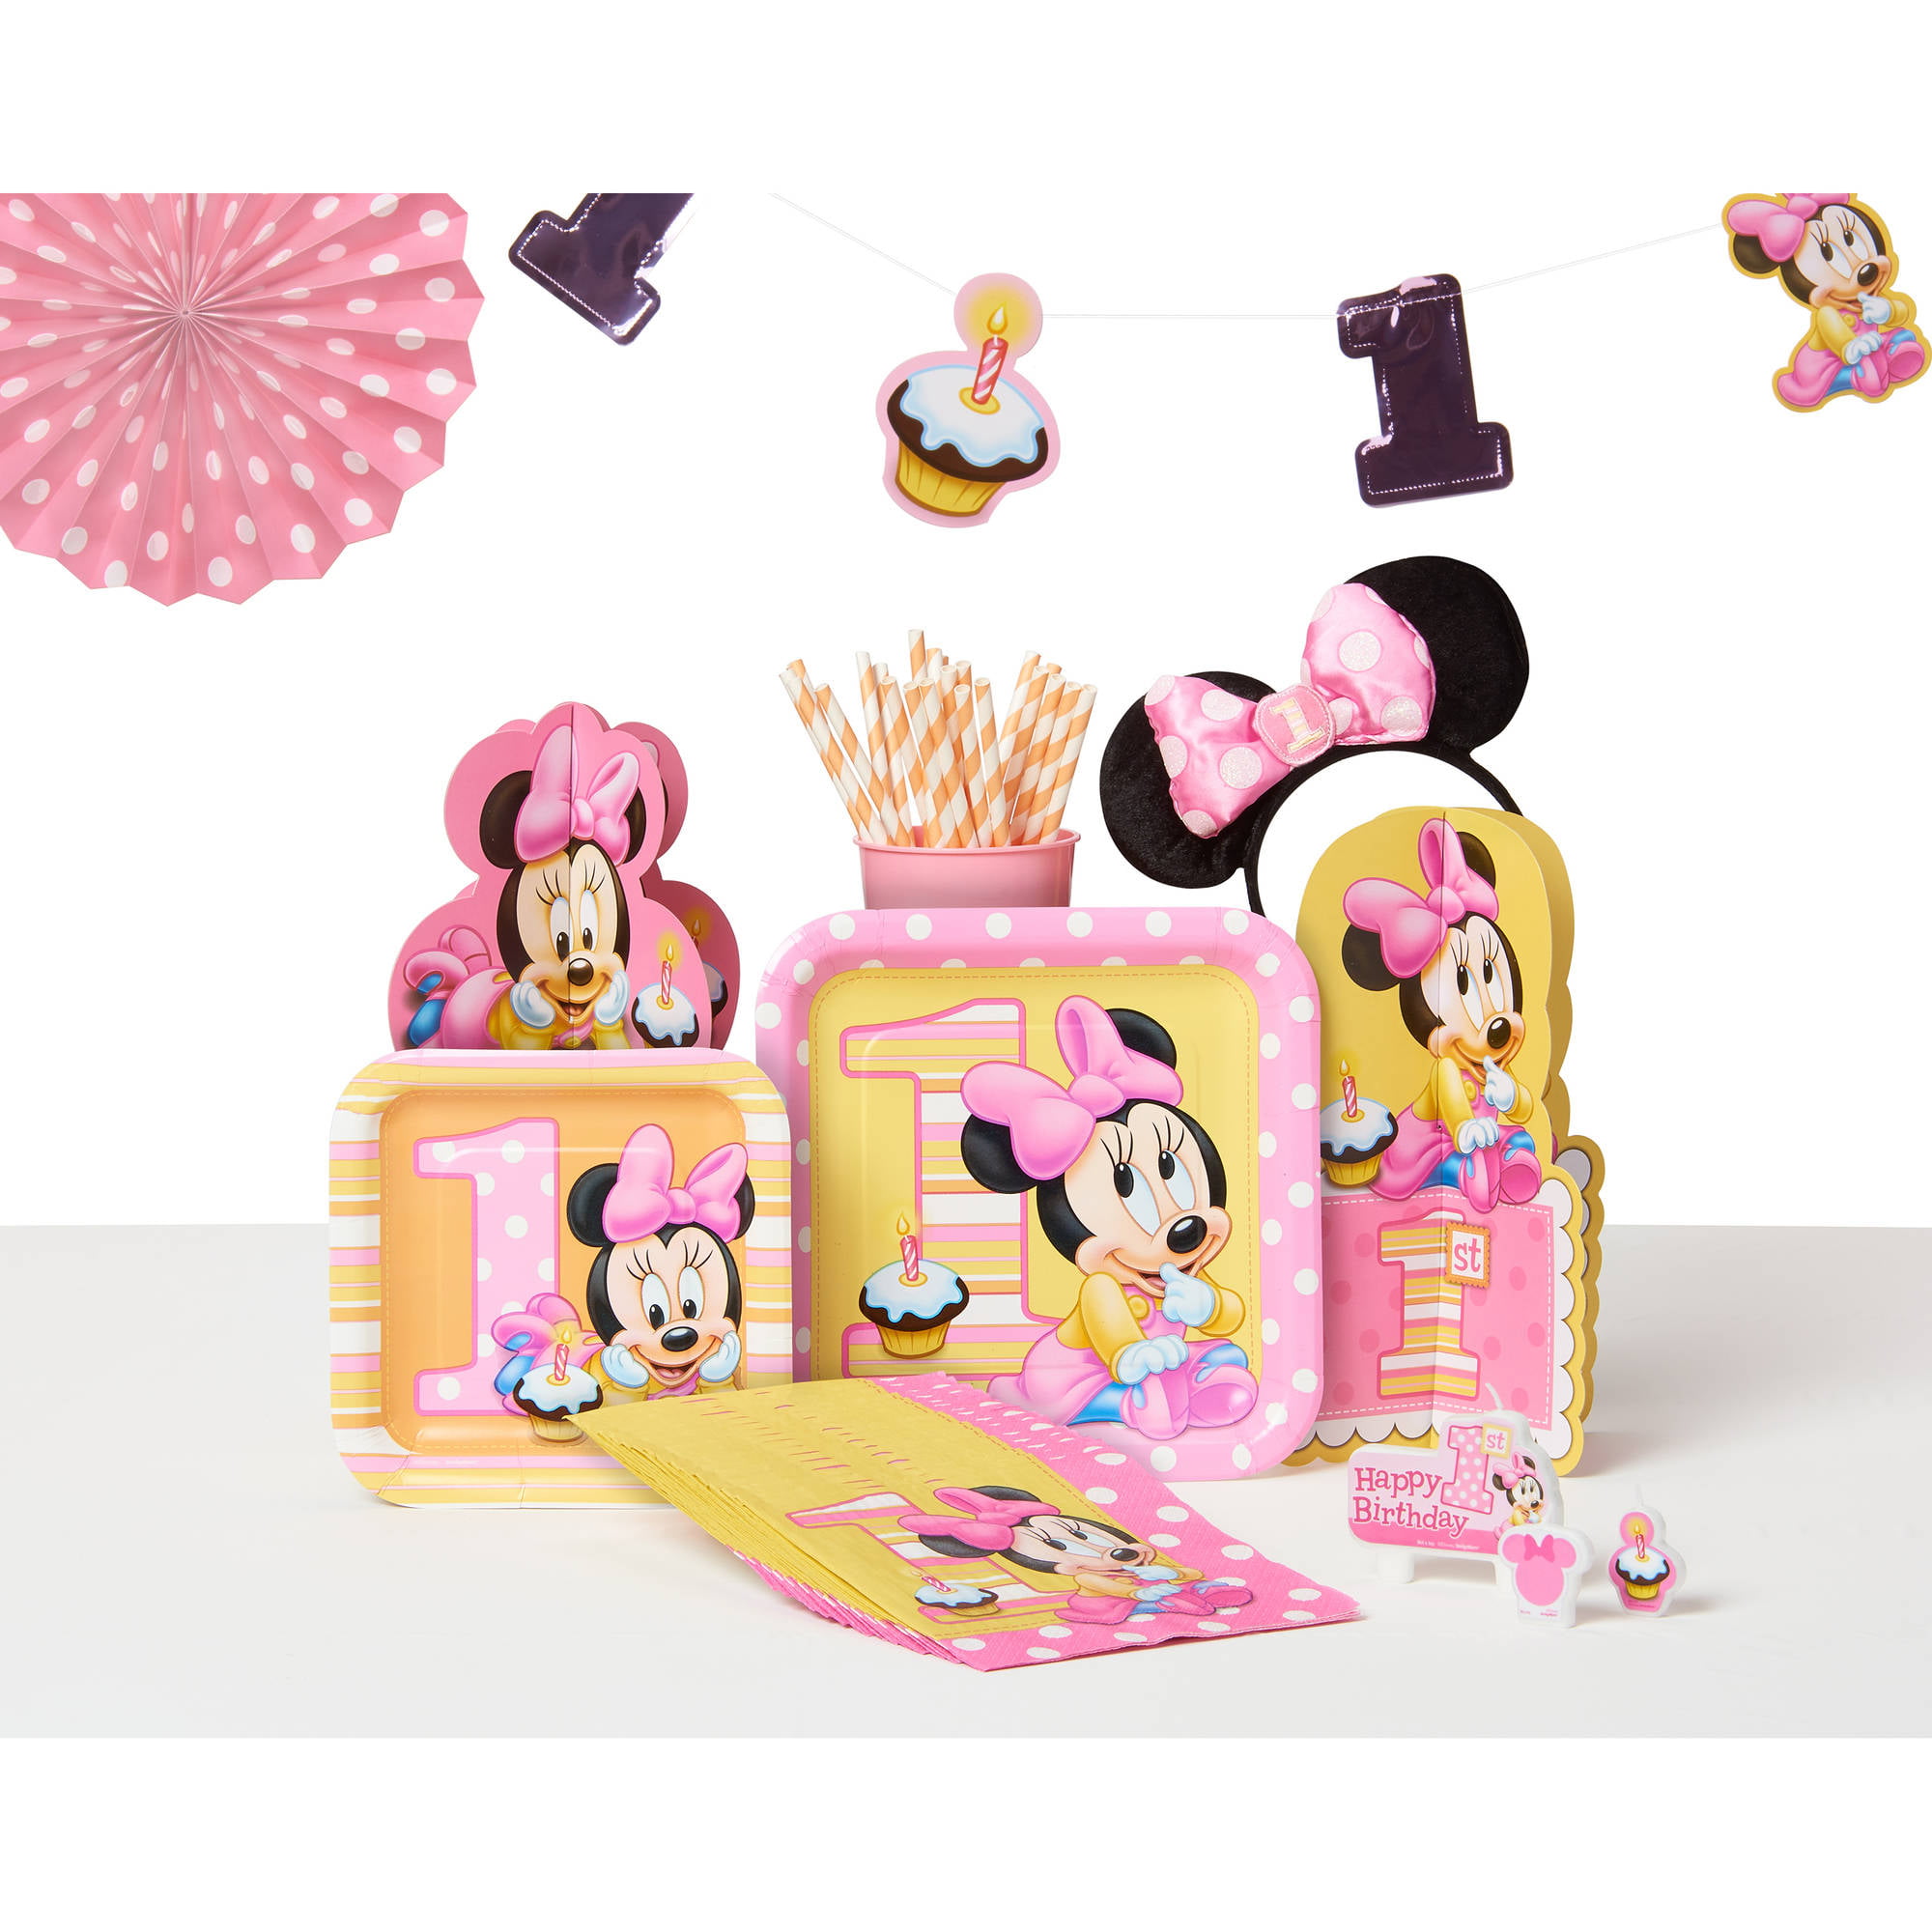 Birthday Candle Set Kids Birthday Party Supplies New Disney Minnie Mouse 4pc 